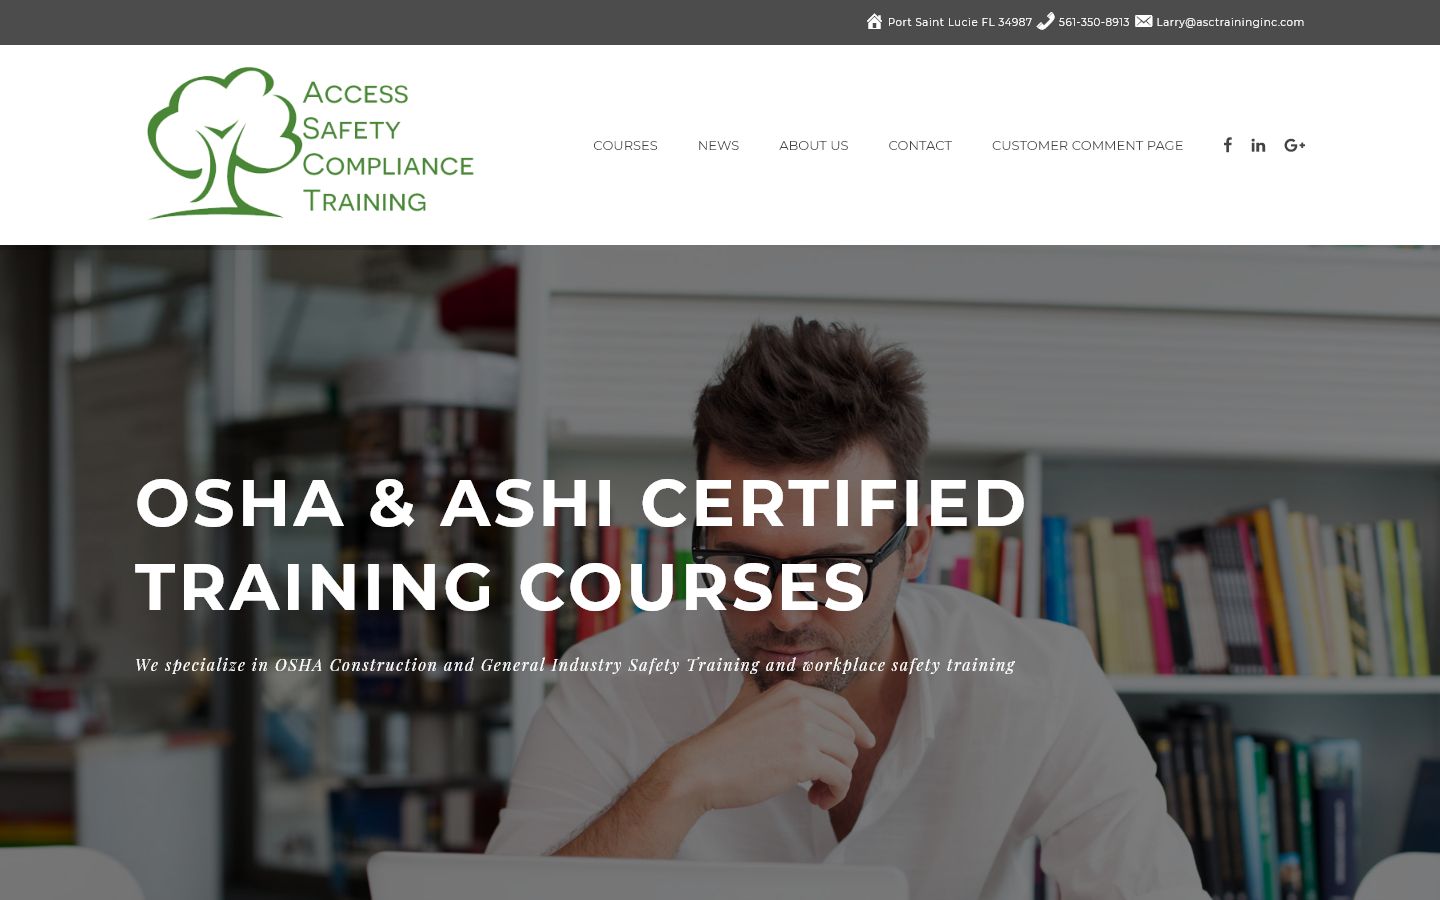 Access safety Compliance Training